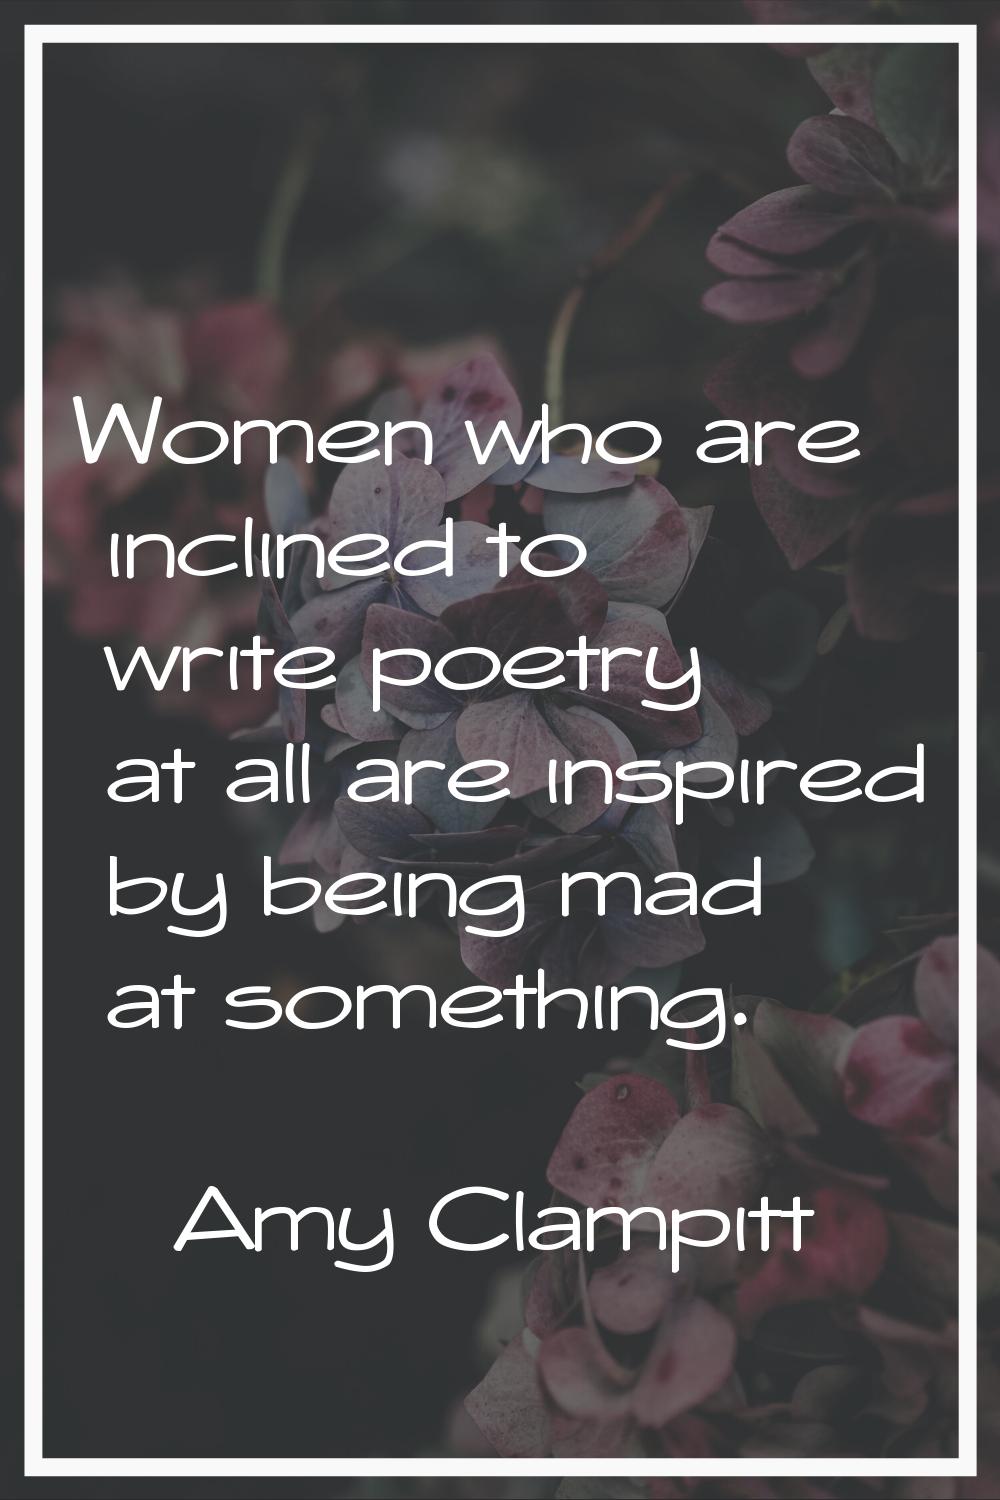 Women who are inclined to write poetry at all are inspired by being mad at something.